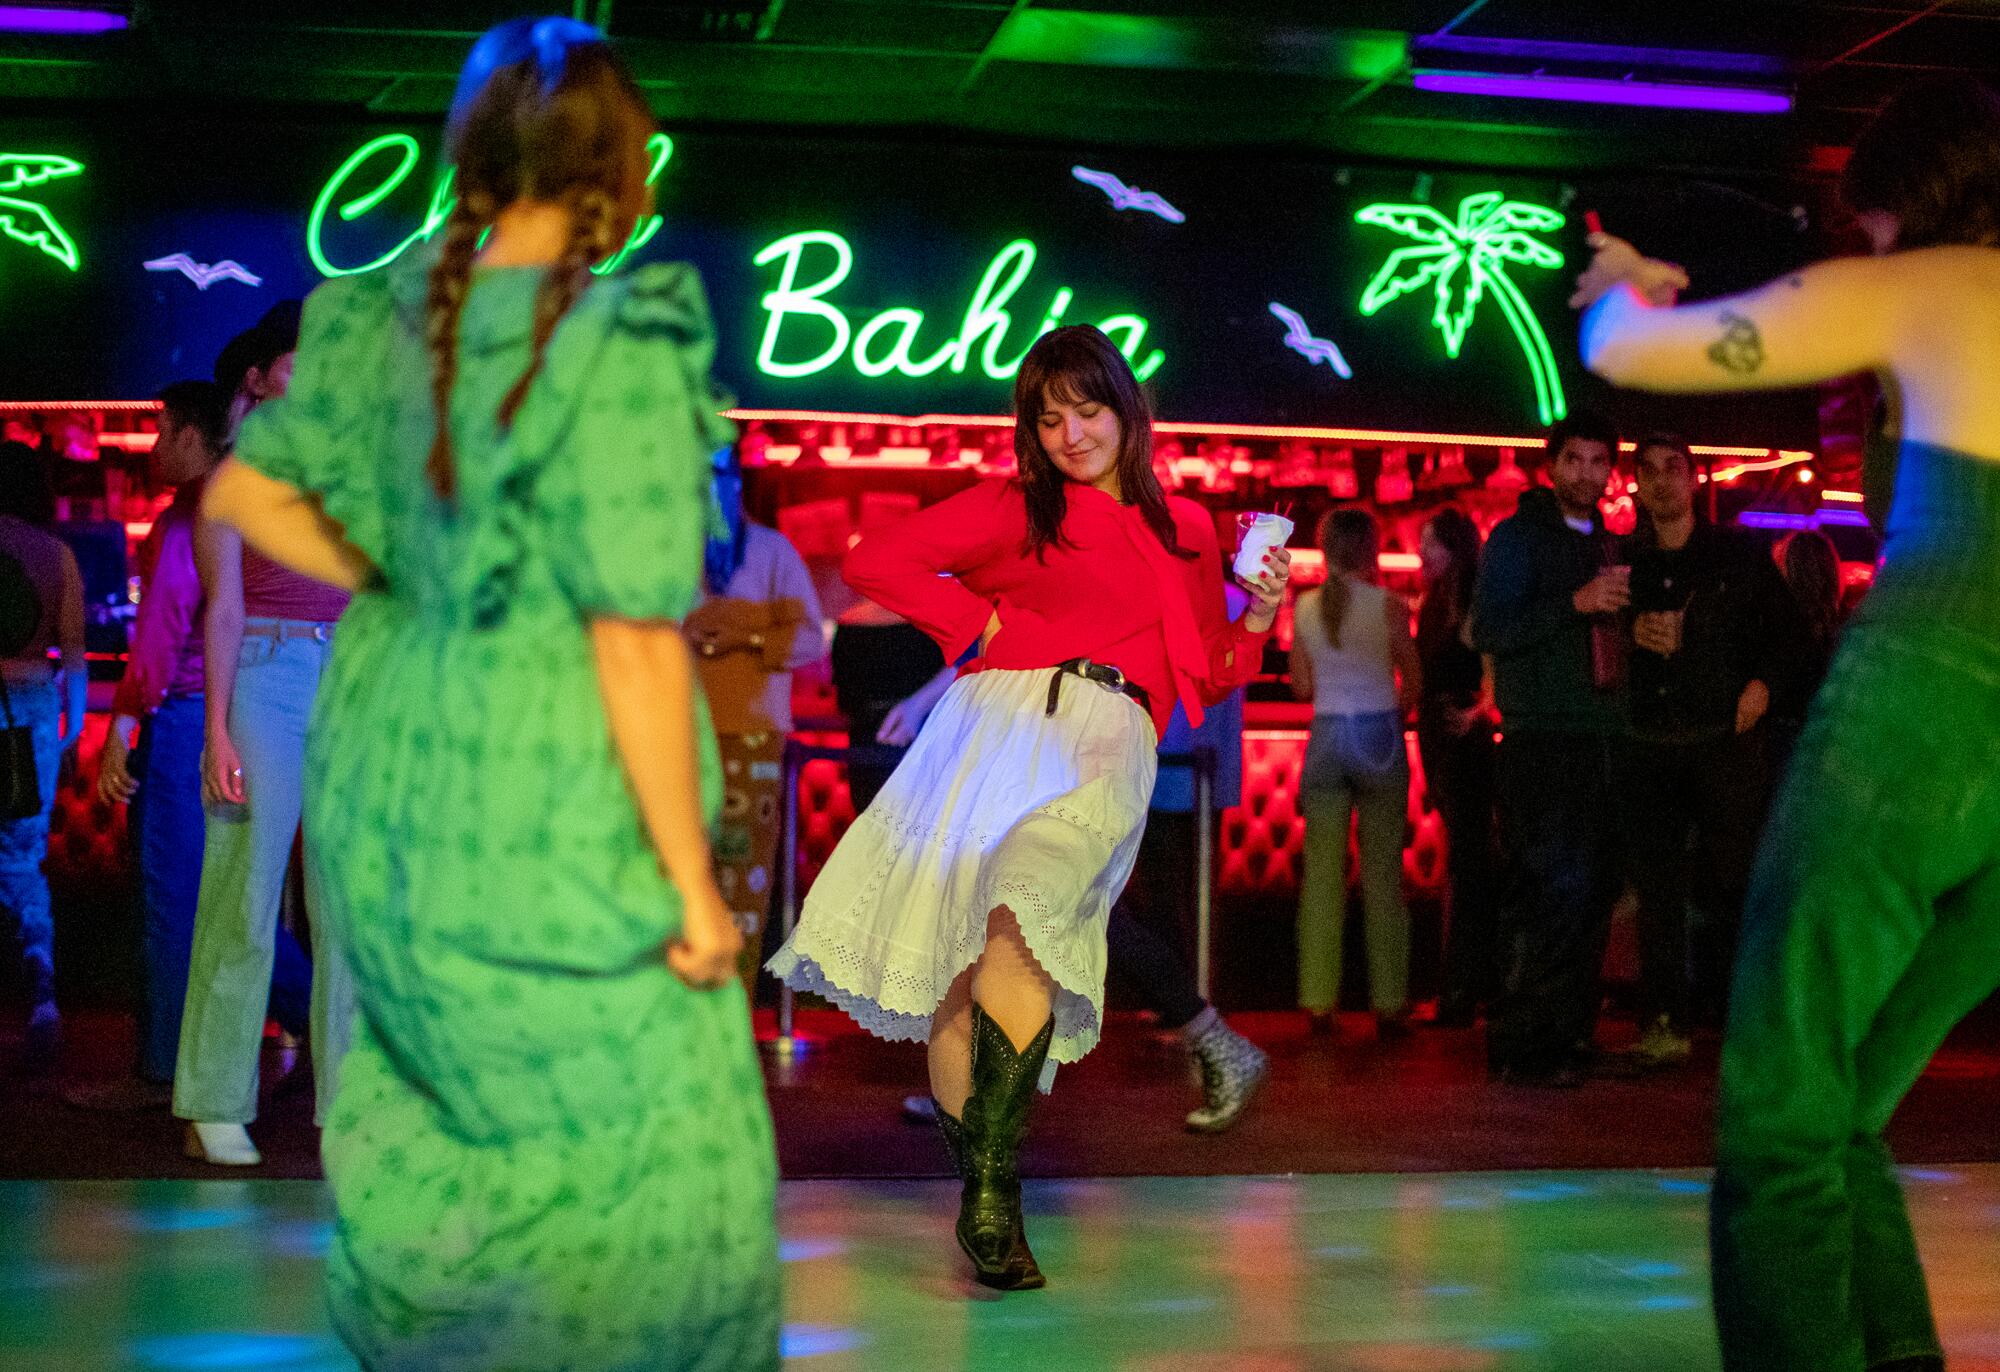 A person in a red sweater and white skirt dances on a multicolored dance floor. 